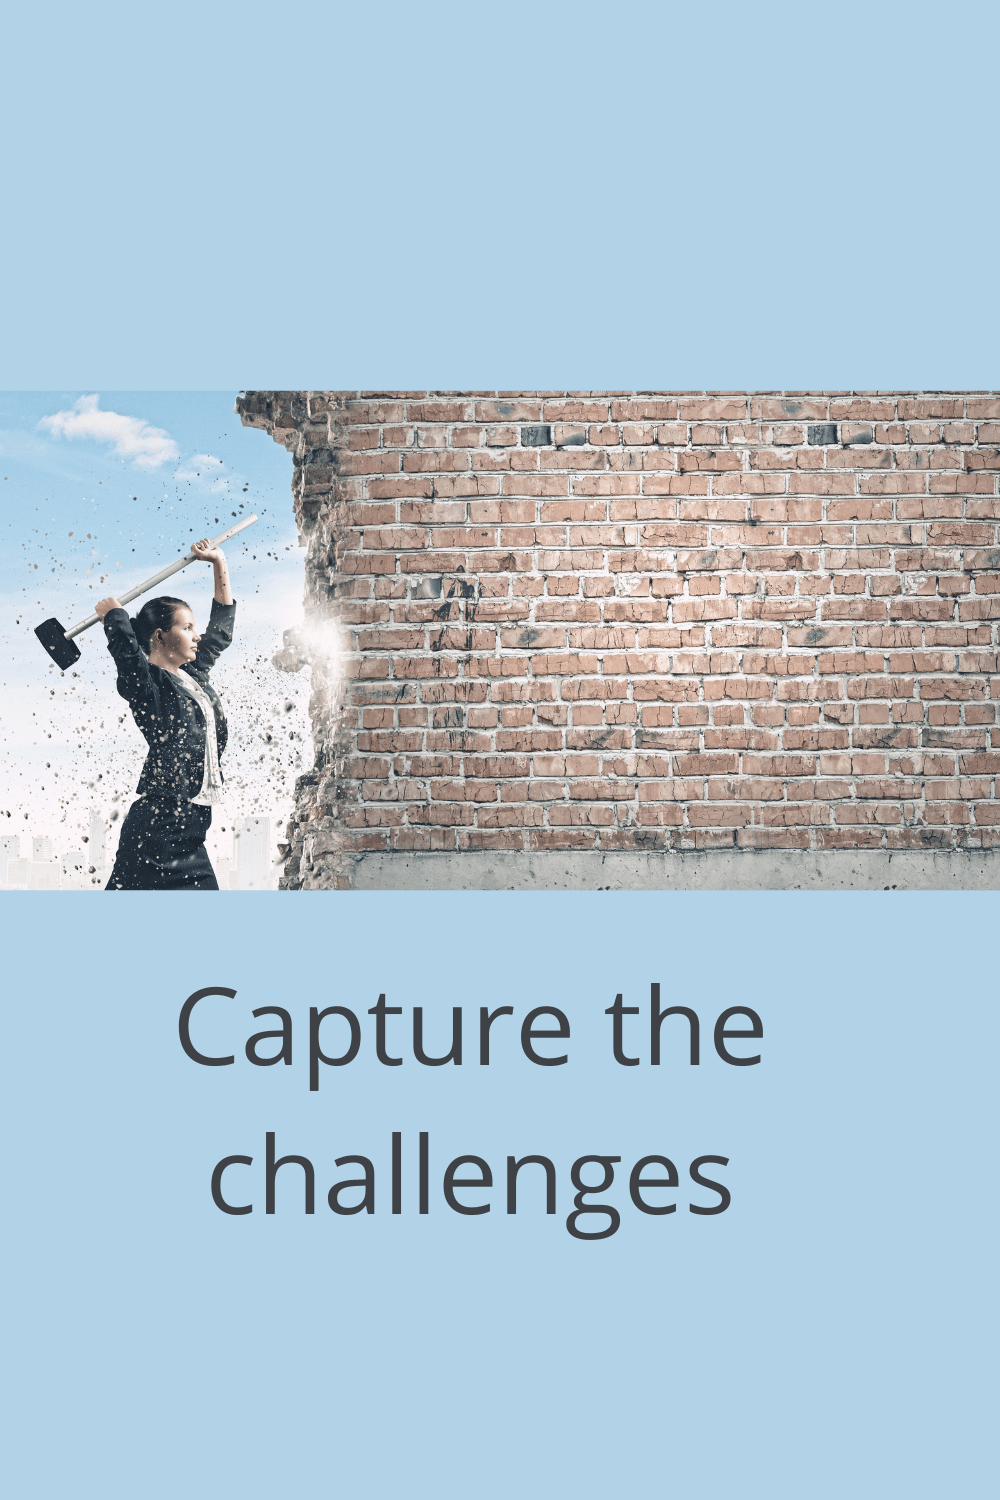 You need to know how to capture the challenges